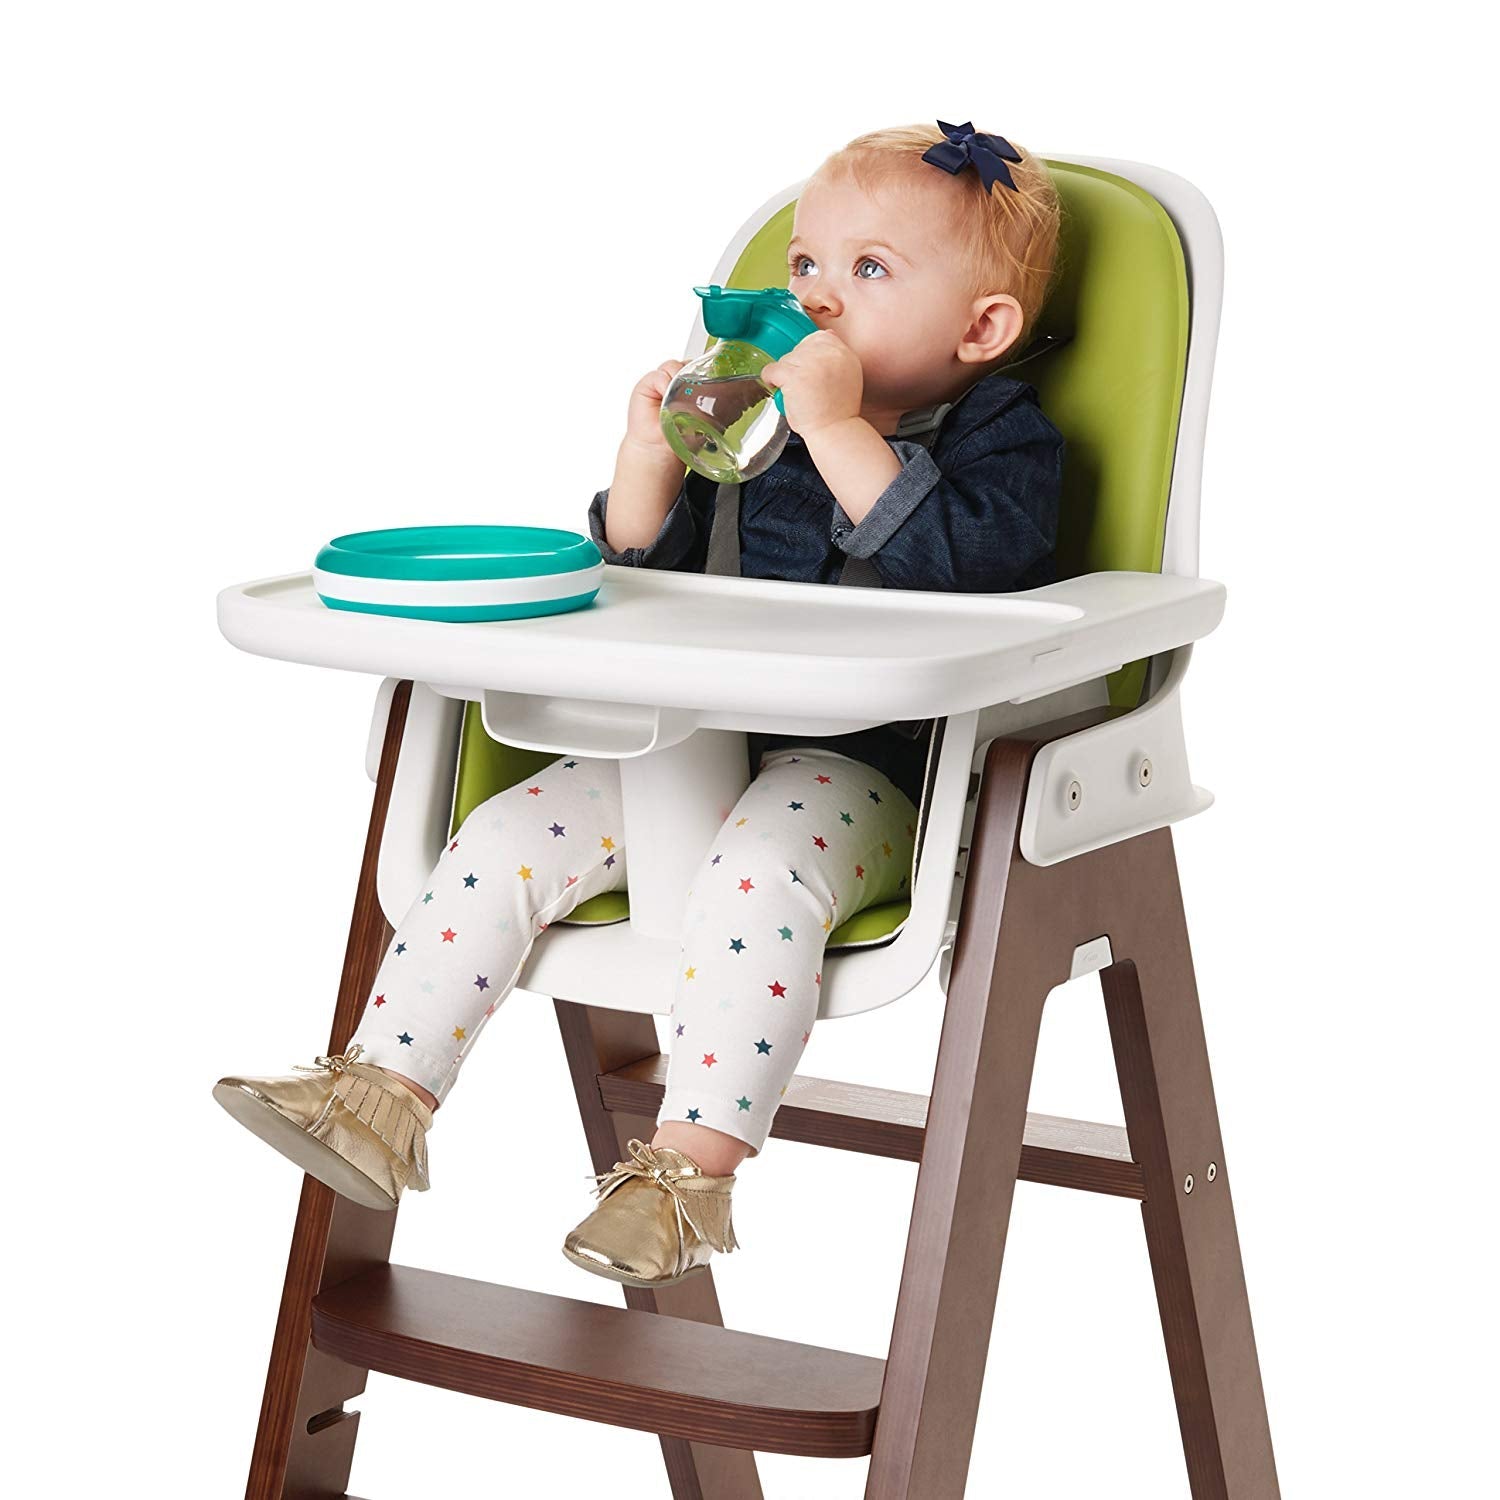 OXO TOT Transitions Soft Spout Sippy Cup with Removable Handles - 6 OZ - ANB Baby -Baby Feeding Cups